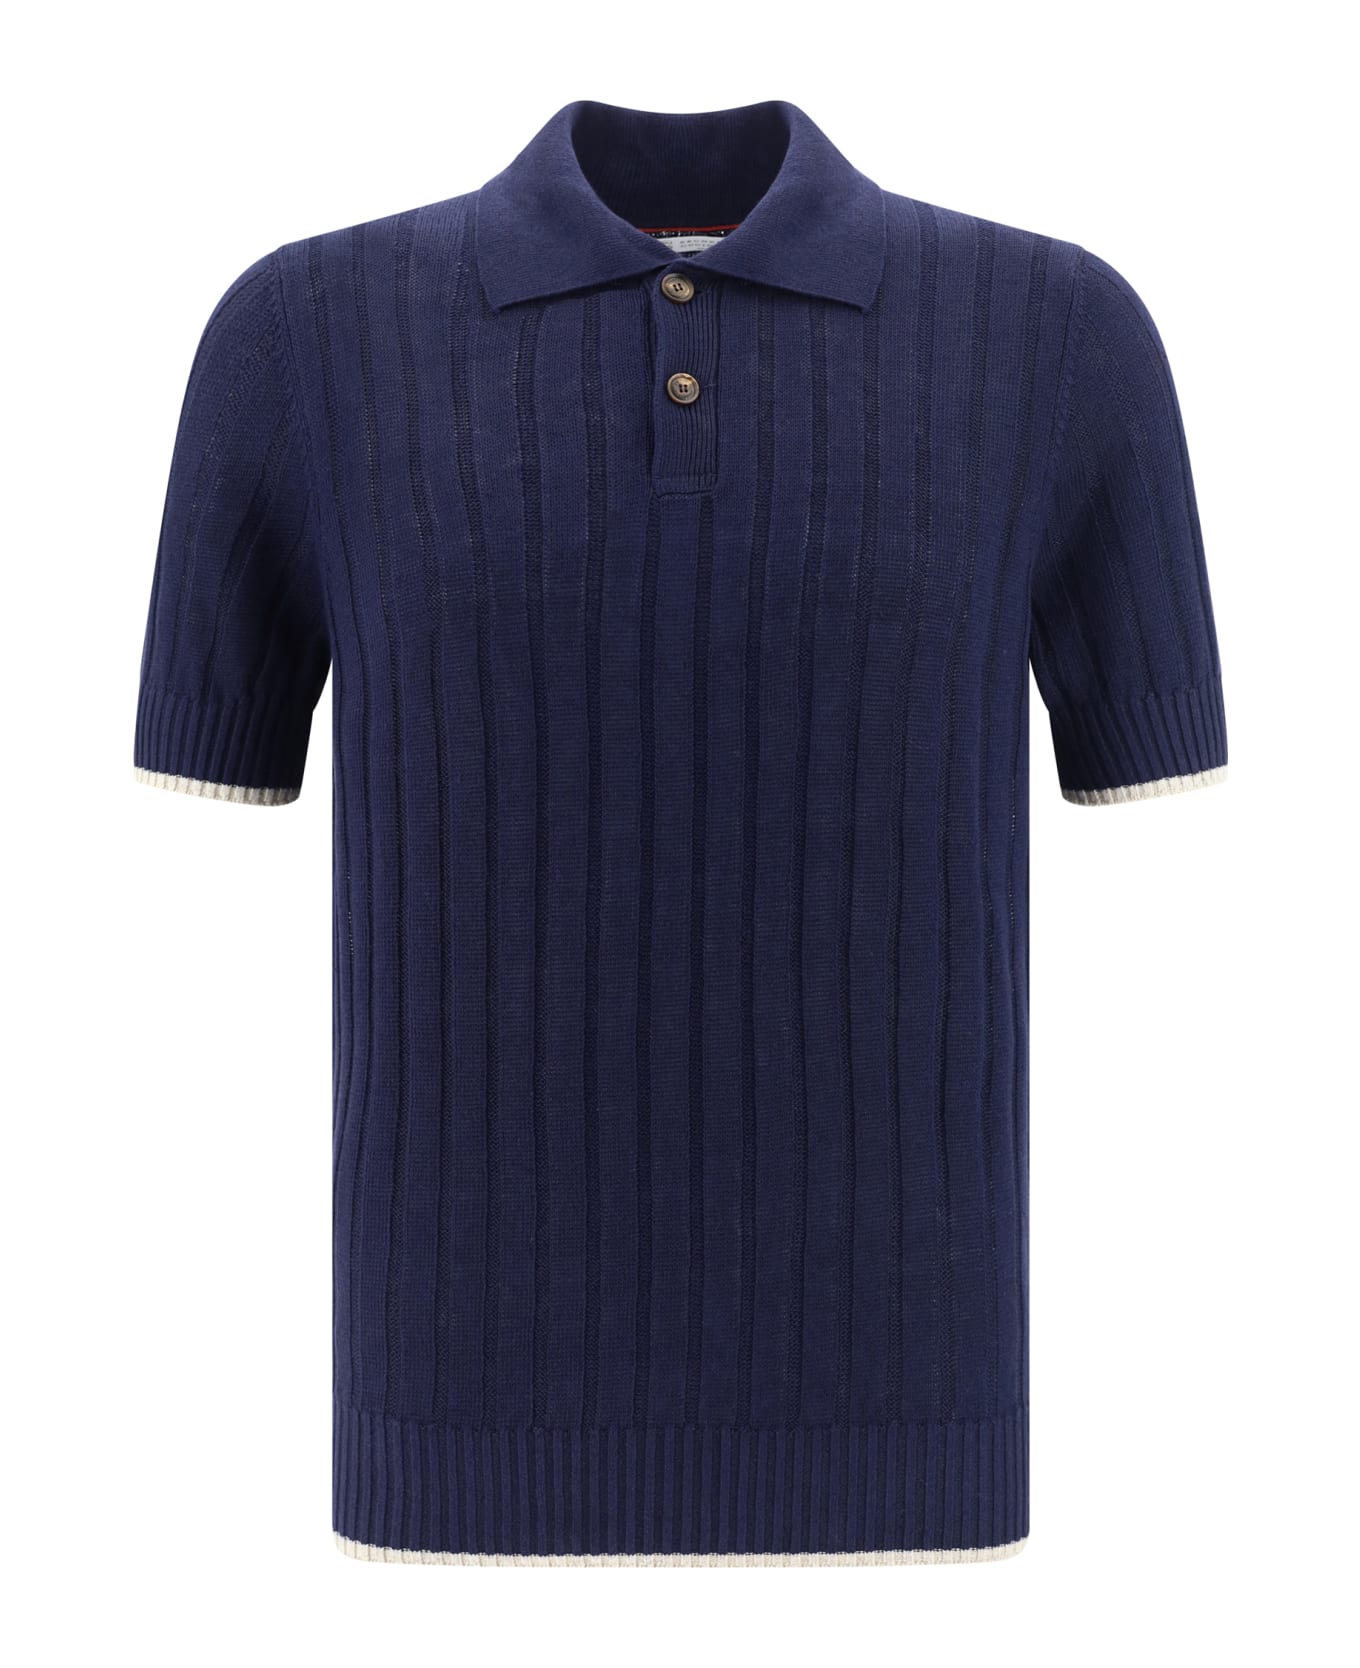 Brunello Cucinelli Polo Shirt - Navy+oyster